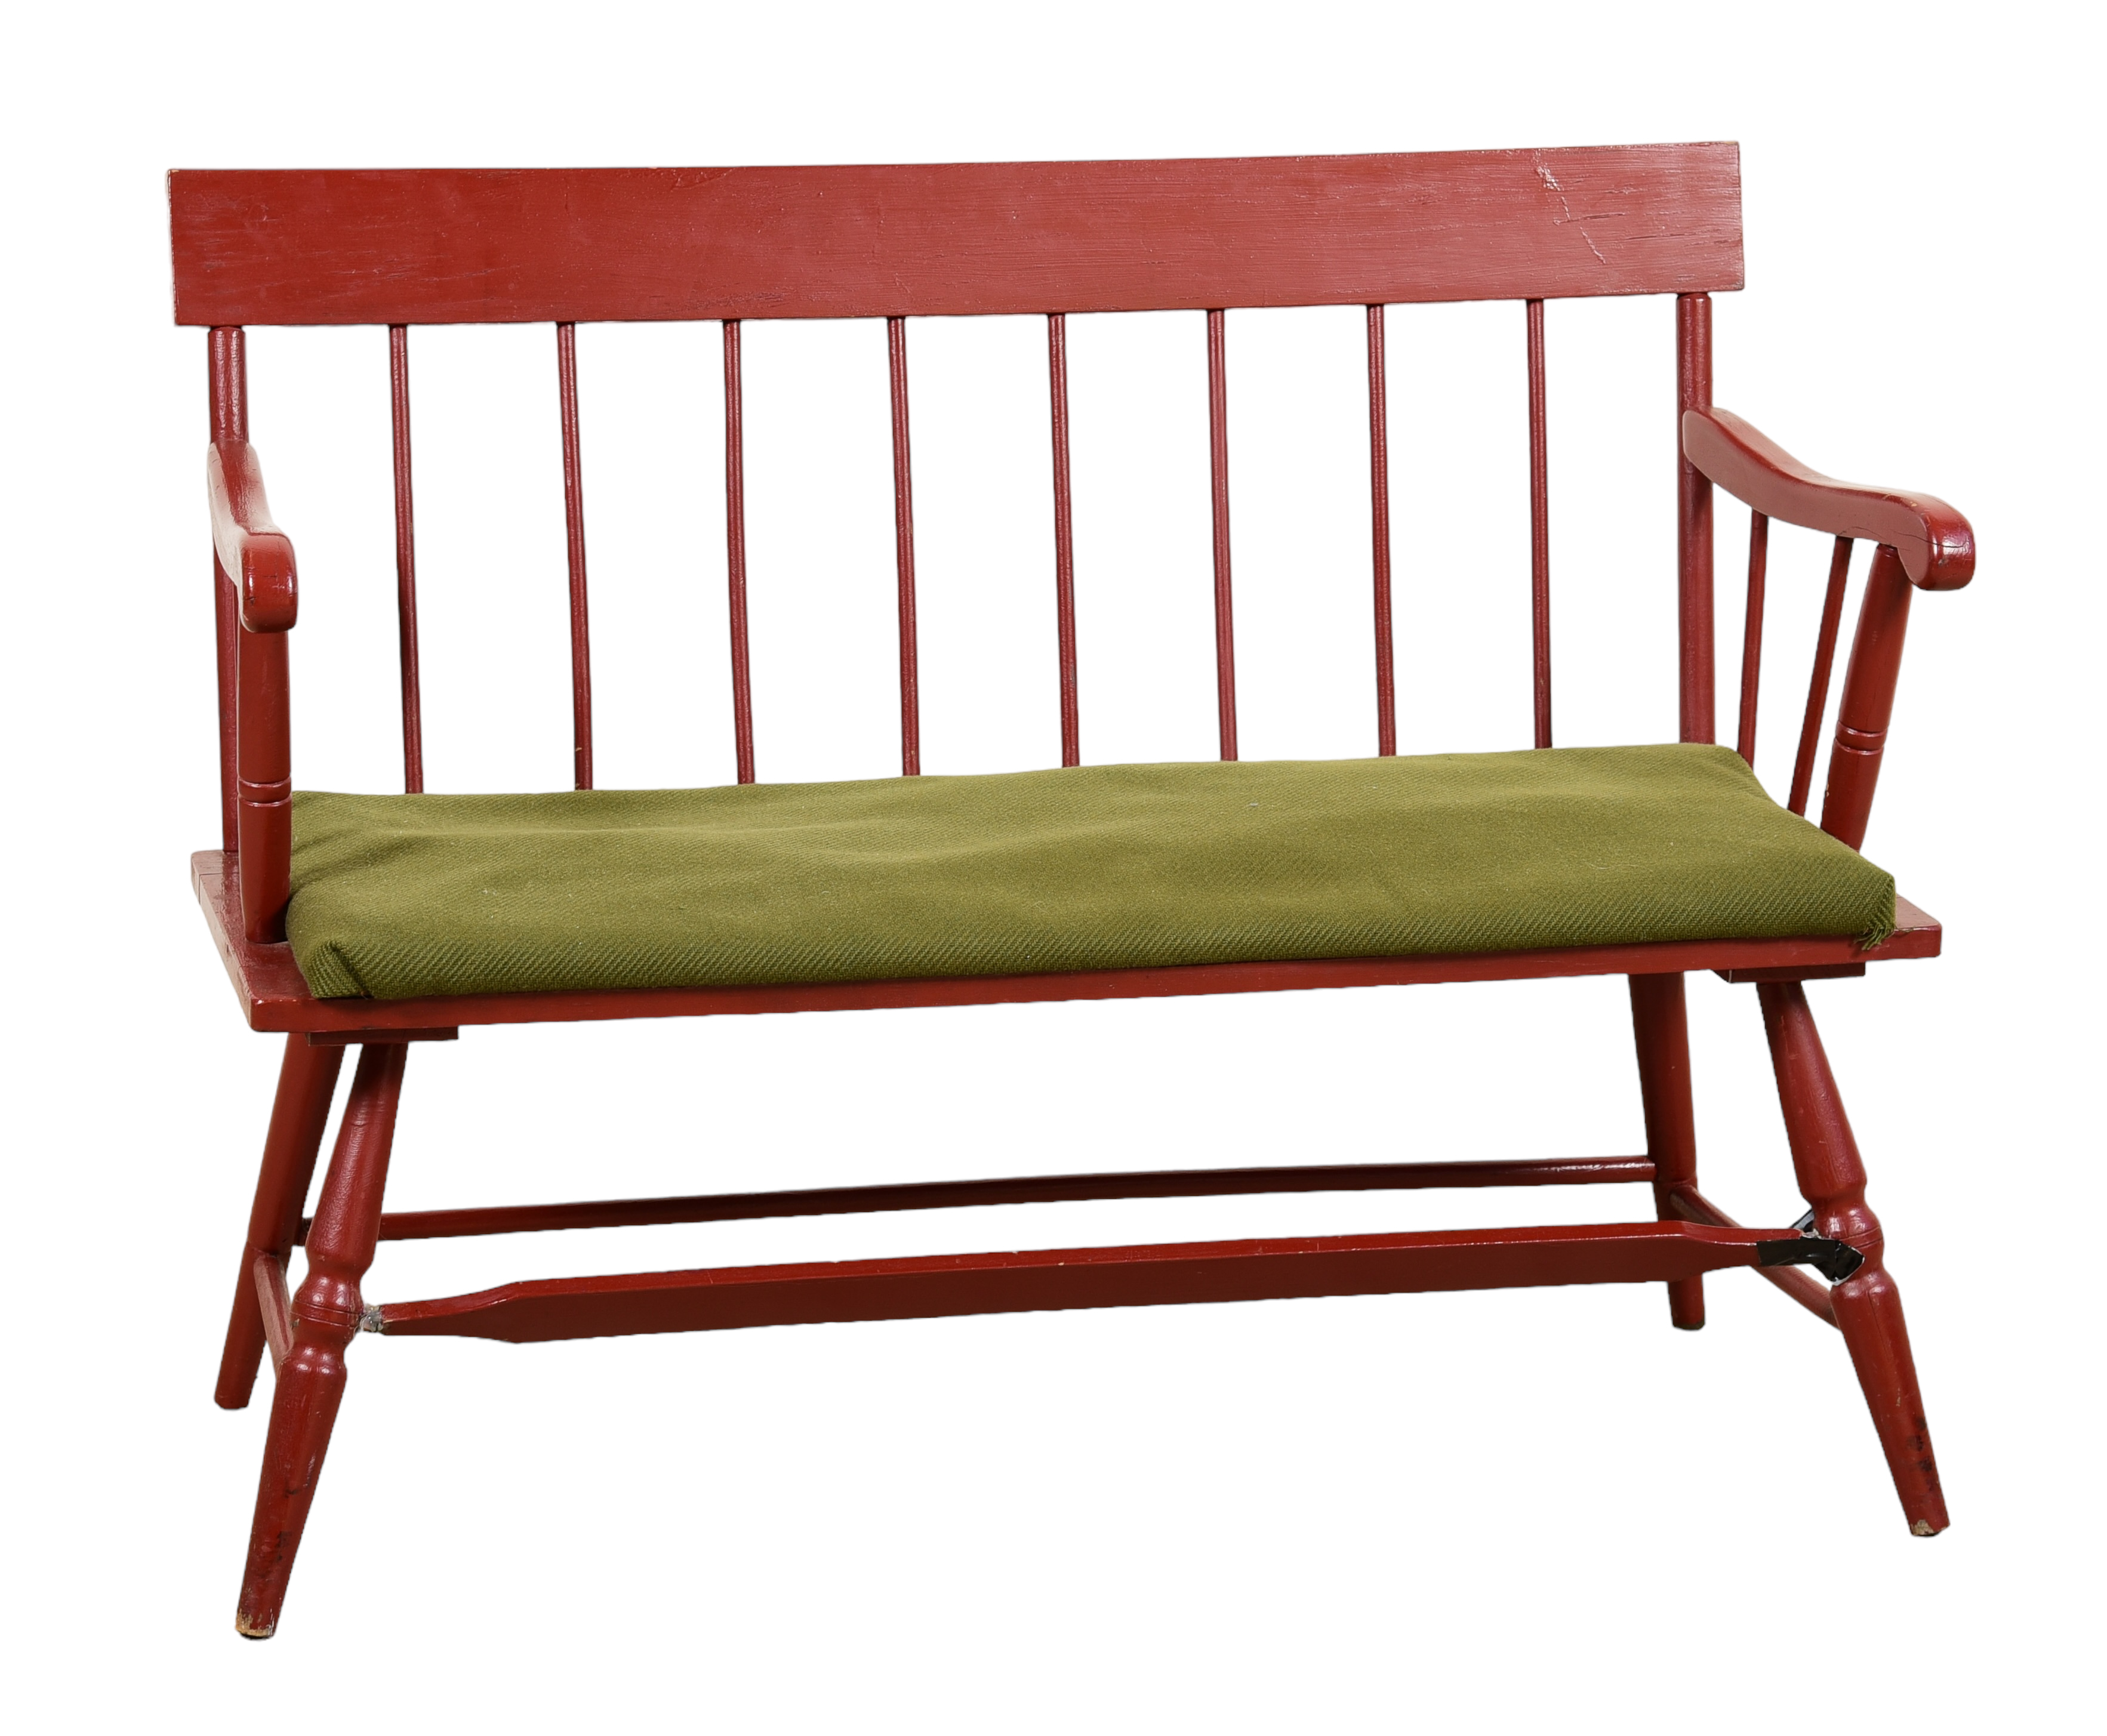 Sheraton red painted bench, replaced